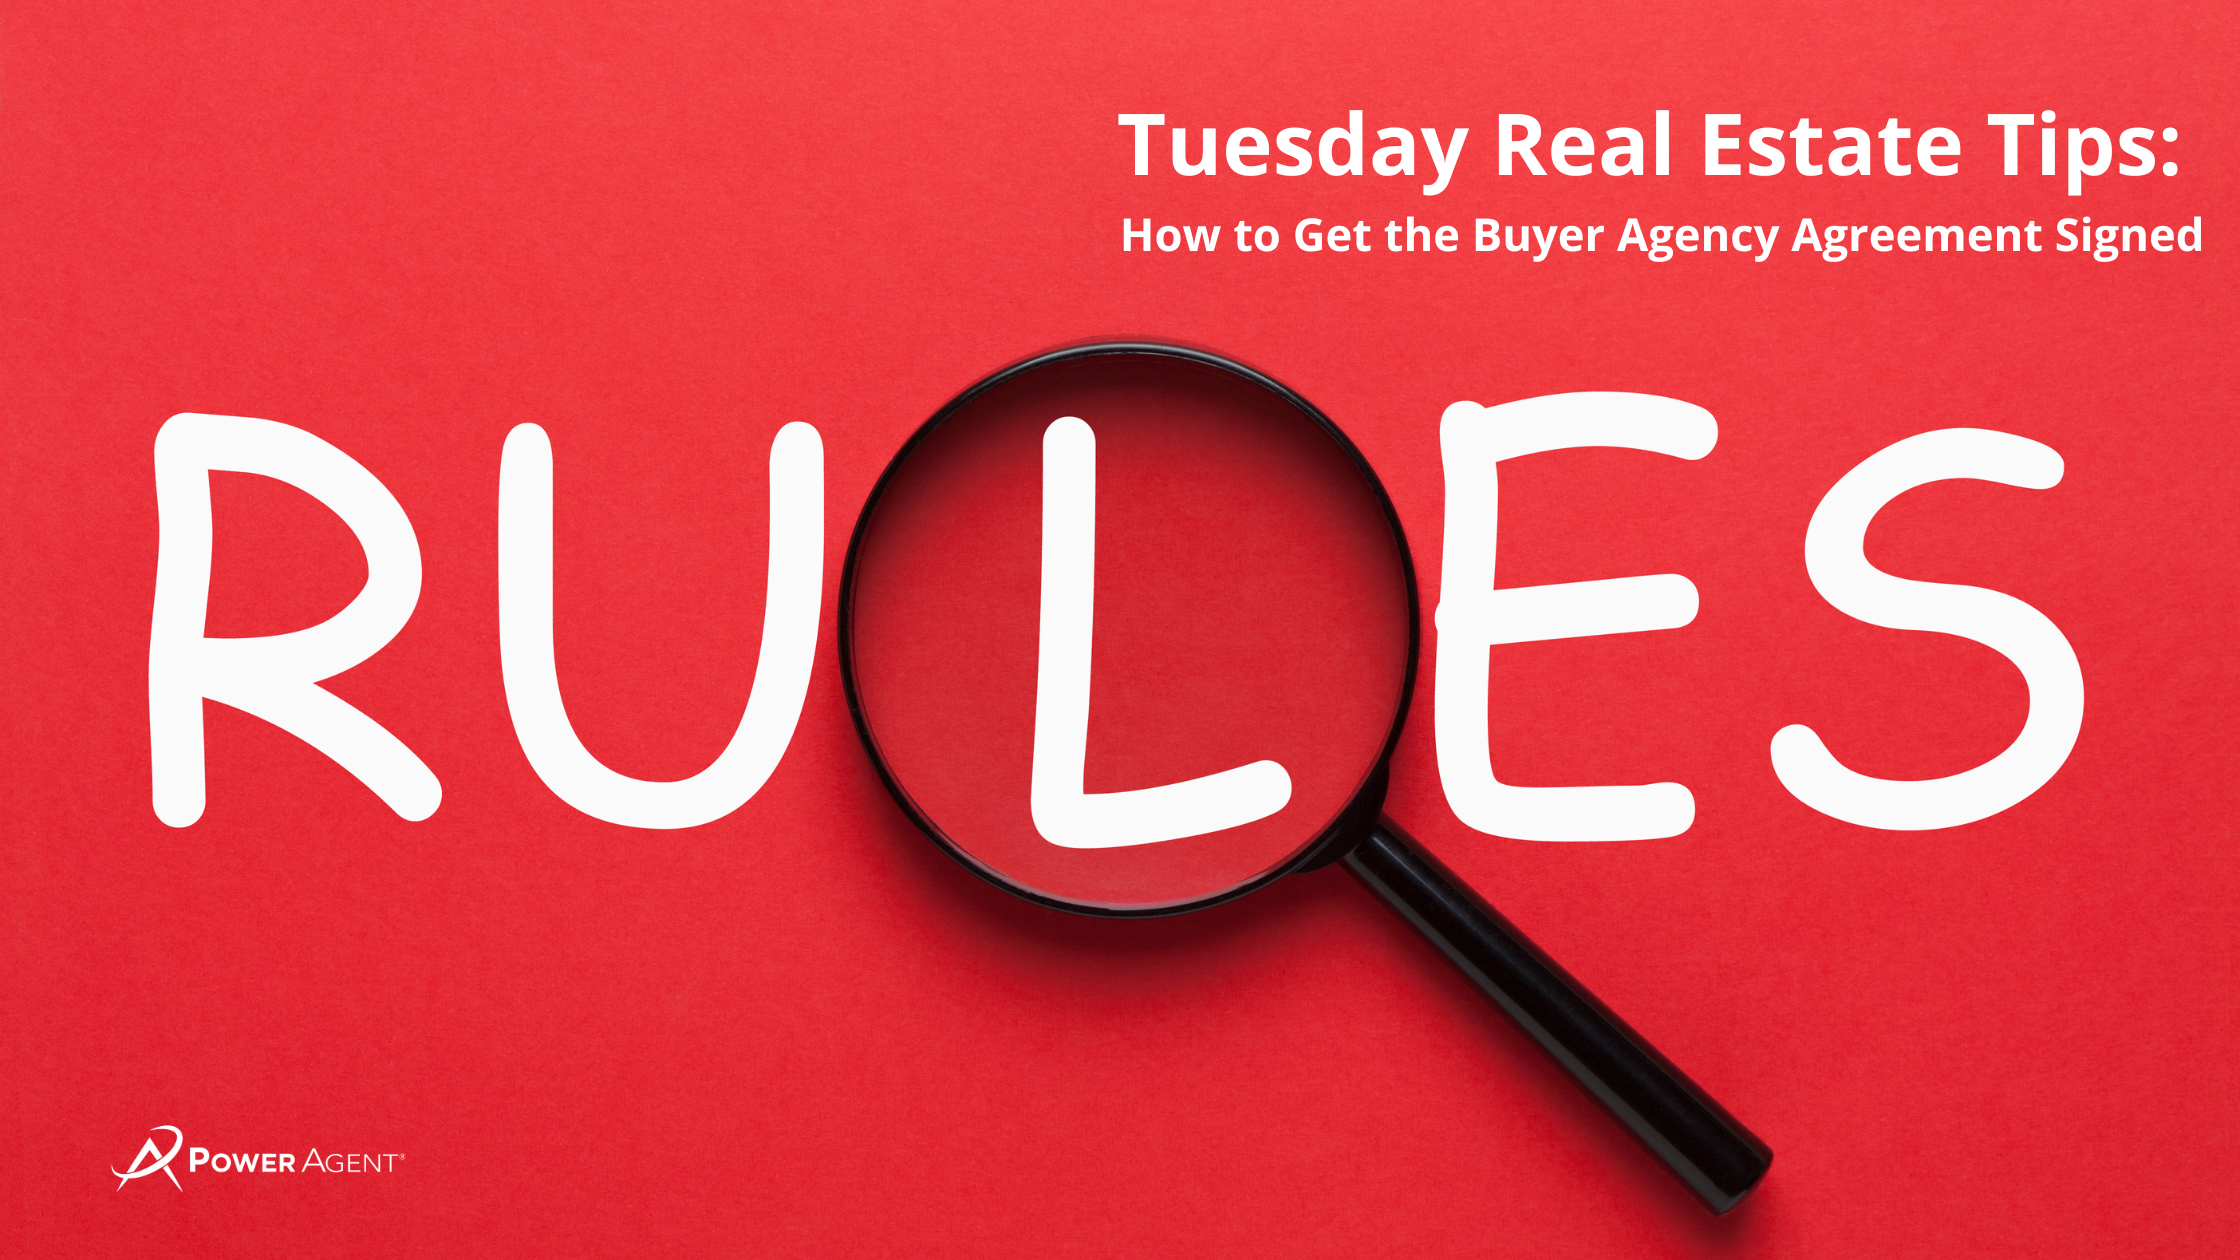 Tuesday Real Estate Tips: How to Get the Buyer Agency Agreement Signed